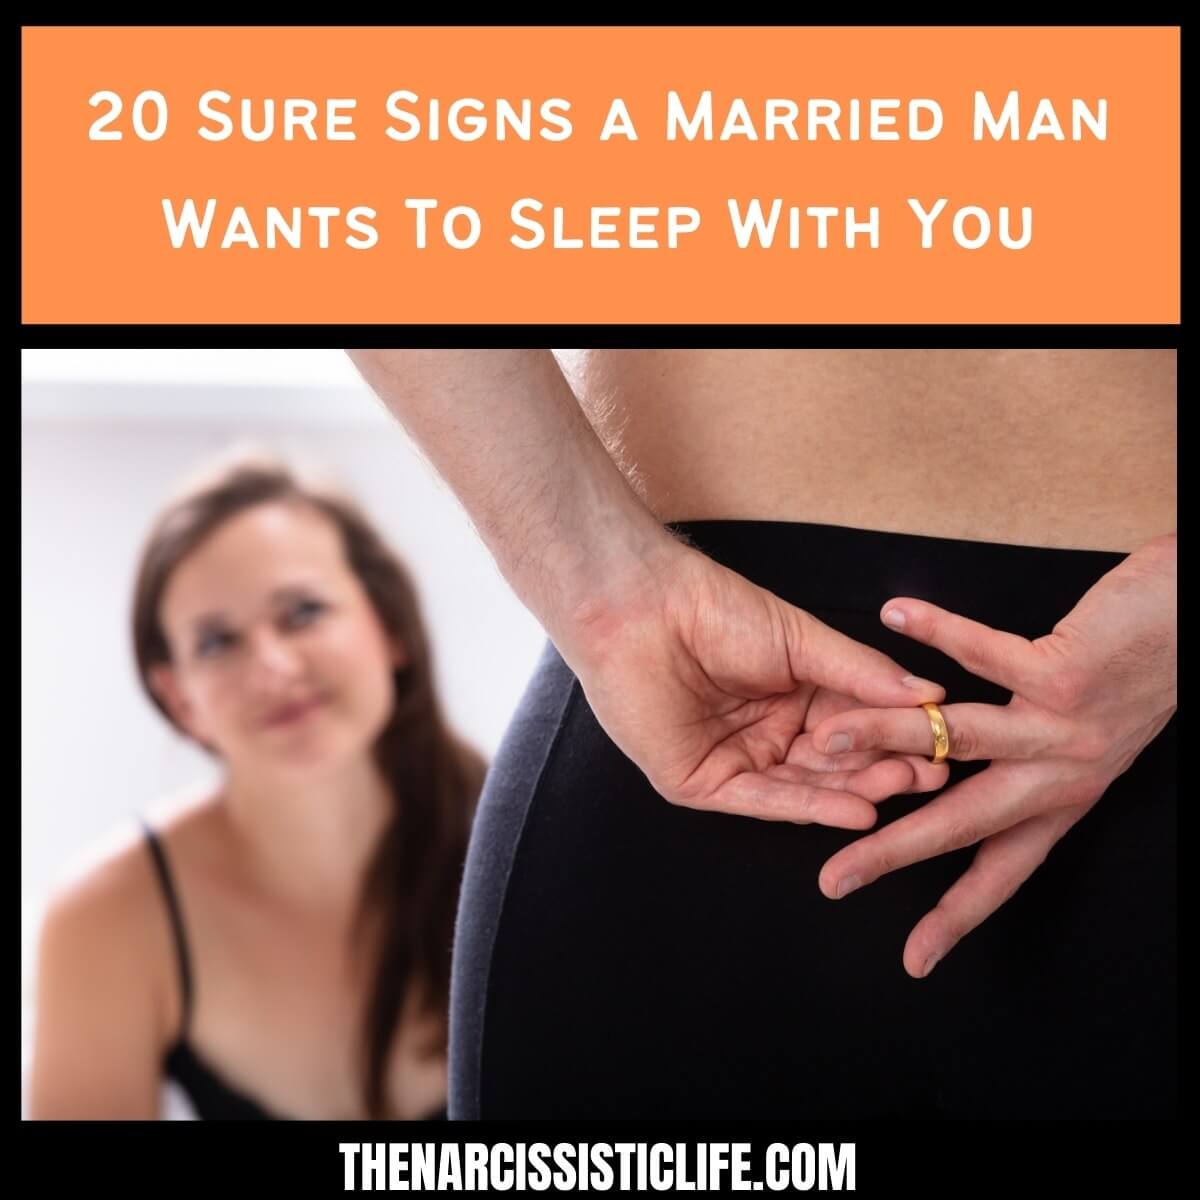 20 Sure Signs a Married Man Wants To Sleep With You